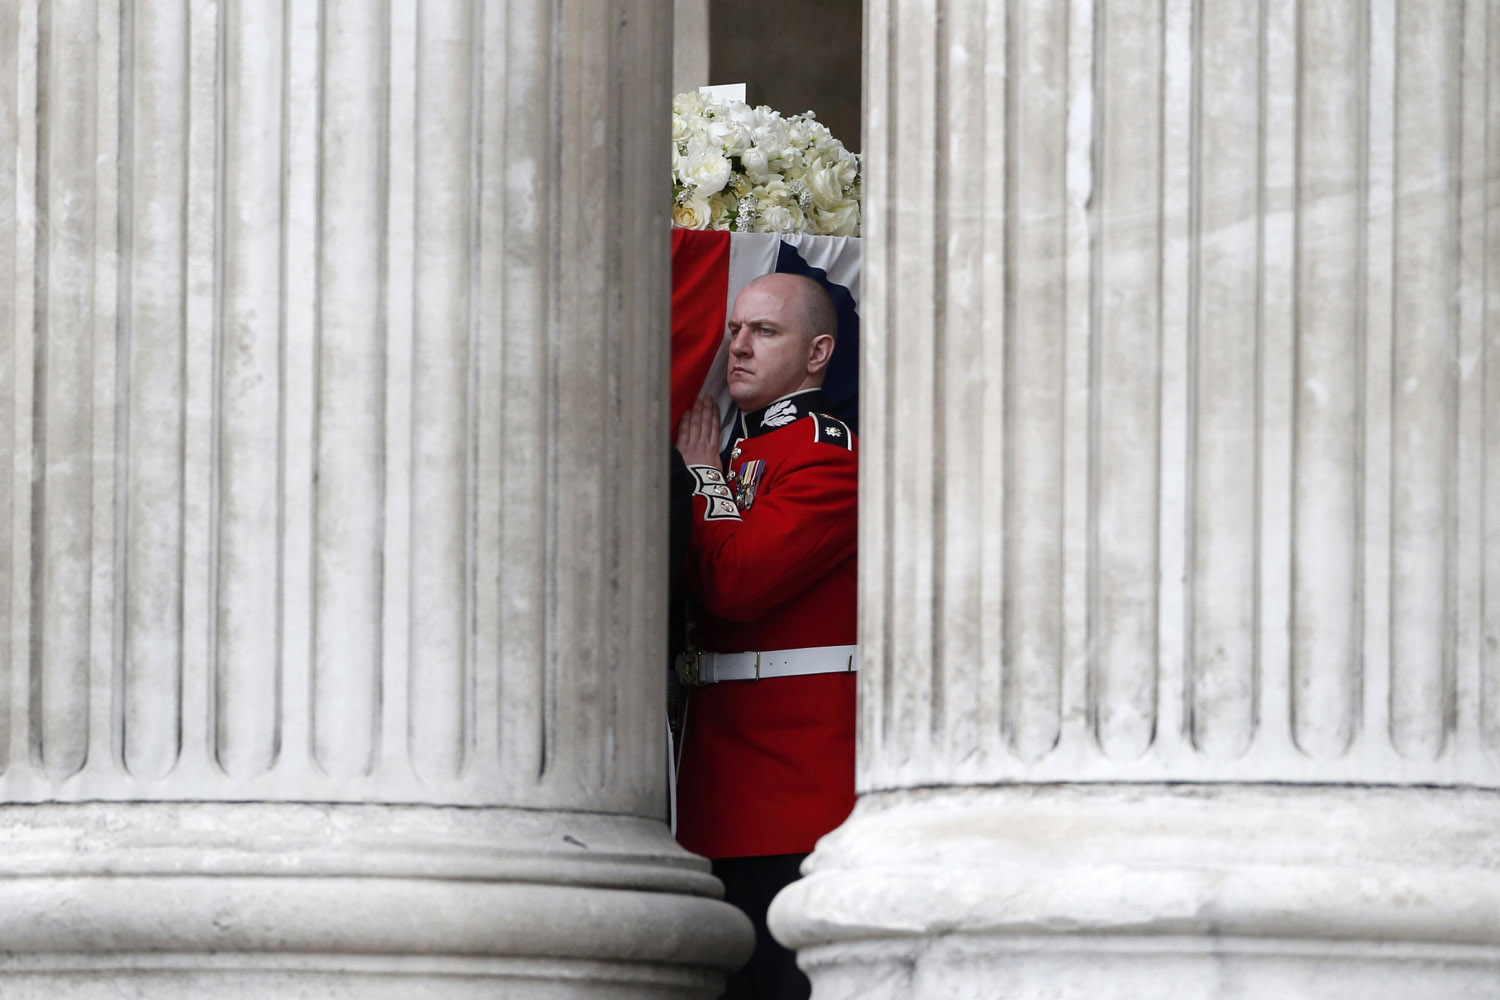 April 17, 2013. The coffin of former British prime minister Margaret Thatcher is carried by the Bearer Party after the funeral service at St Paul's Cathedral in London.